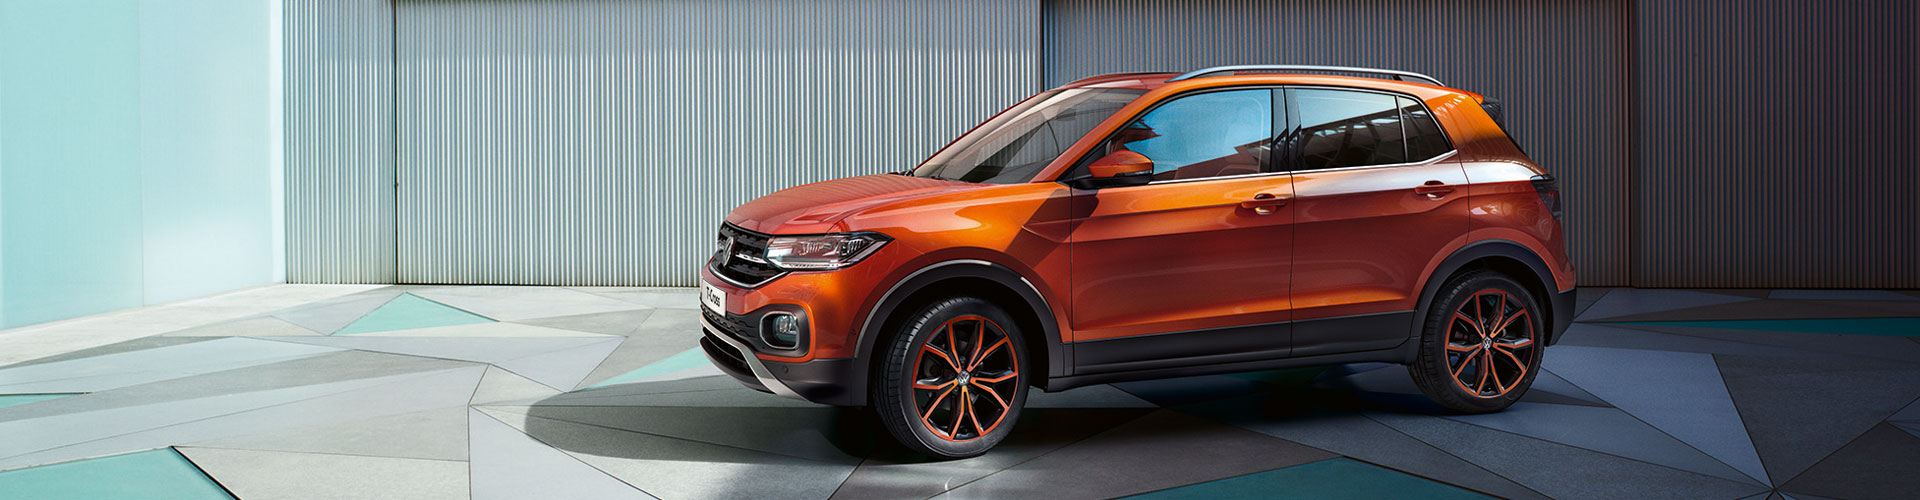 World premiere of the all-new T-Cross